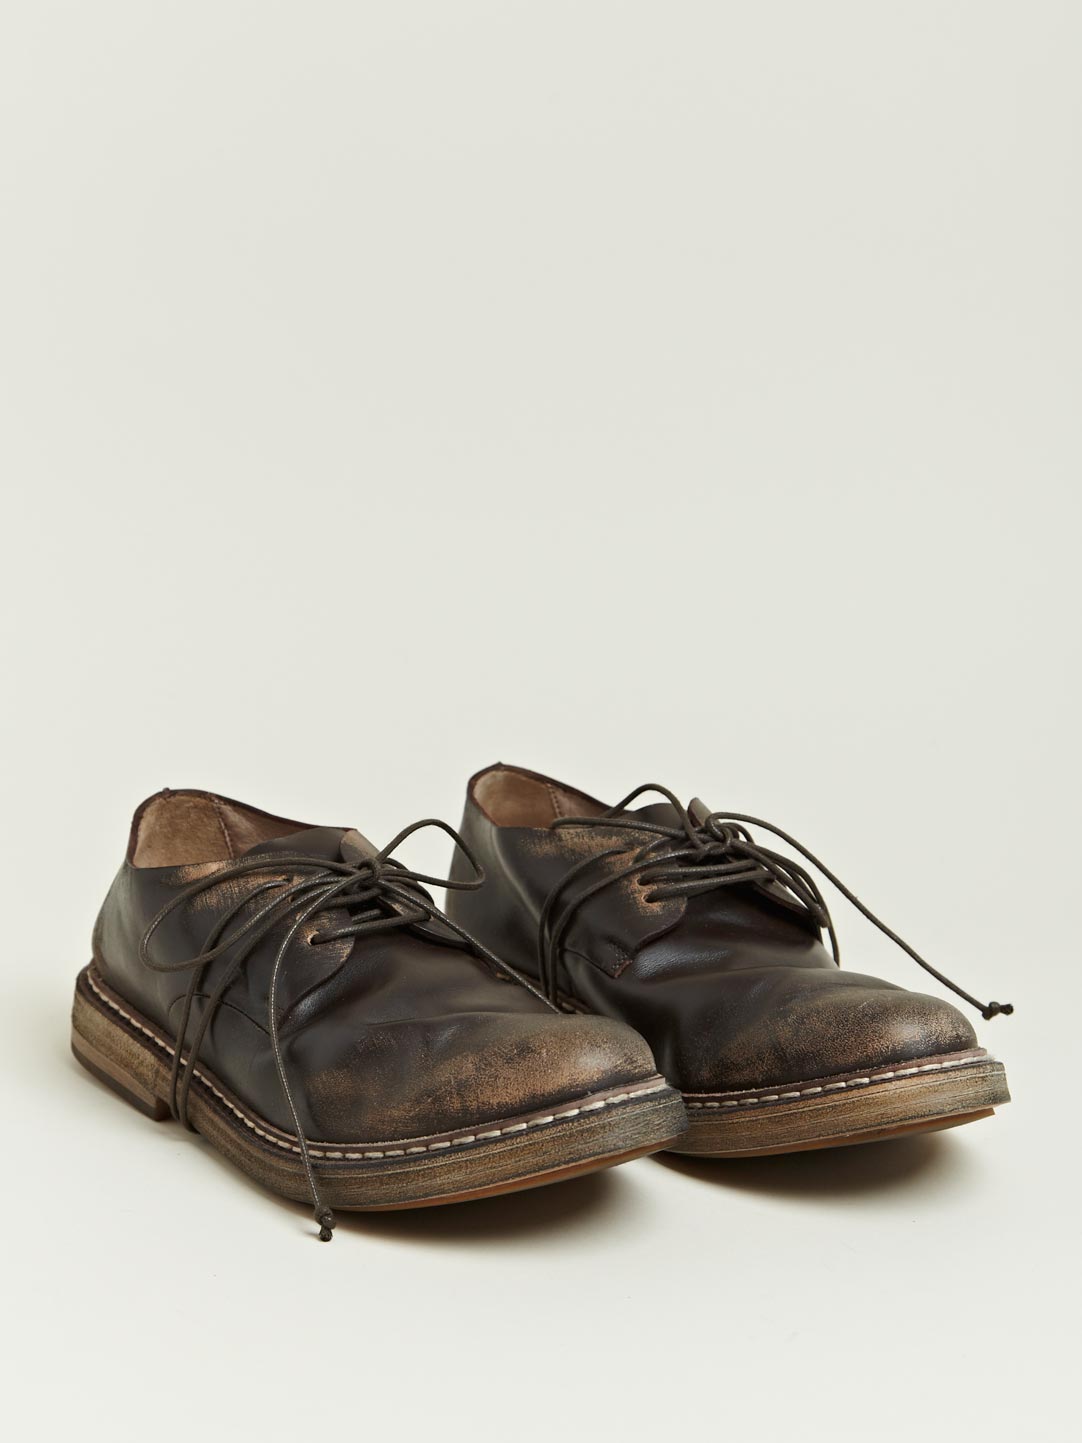 Lyst - Marsèll Marsell Mens Cerata Derby Shoes in Brown for Men